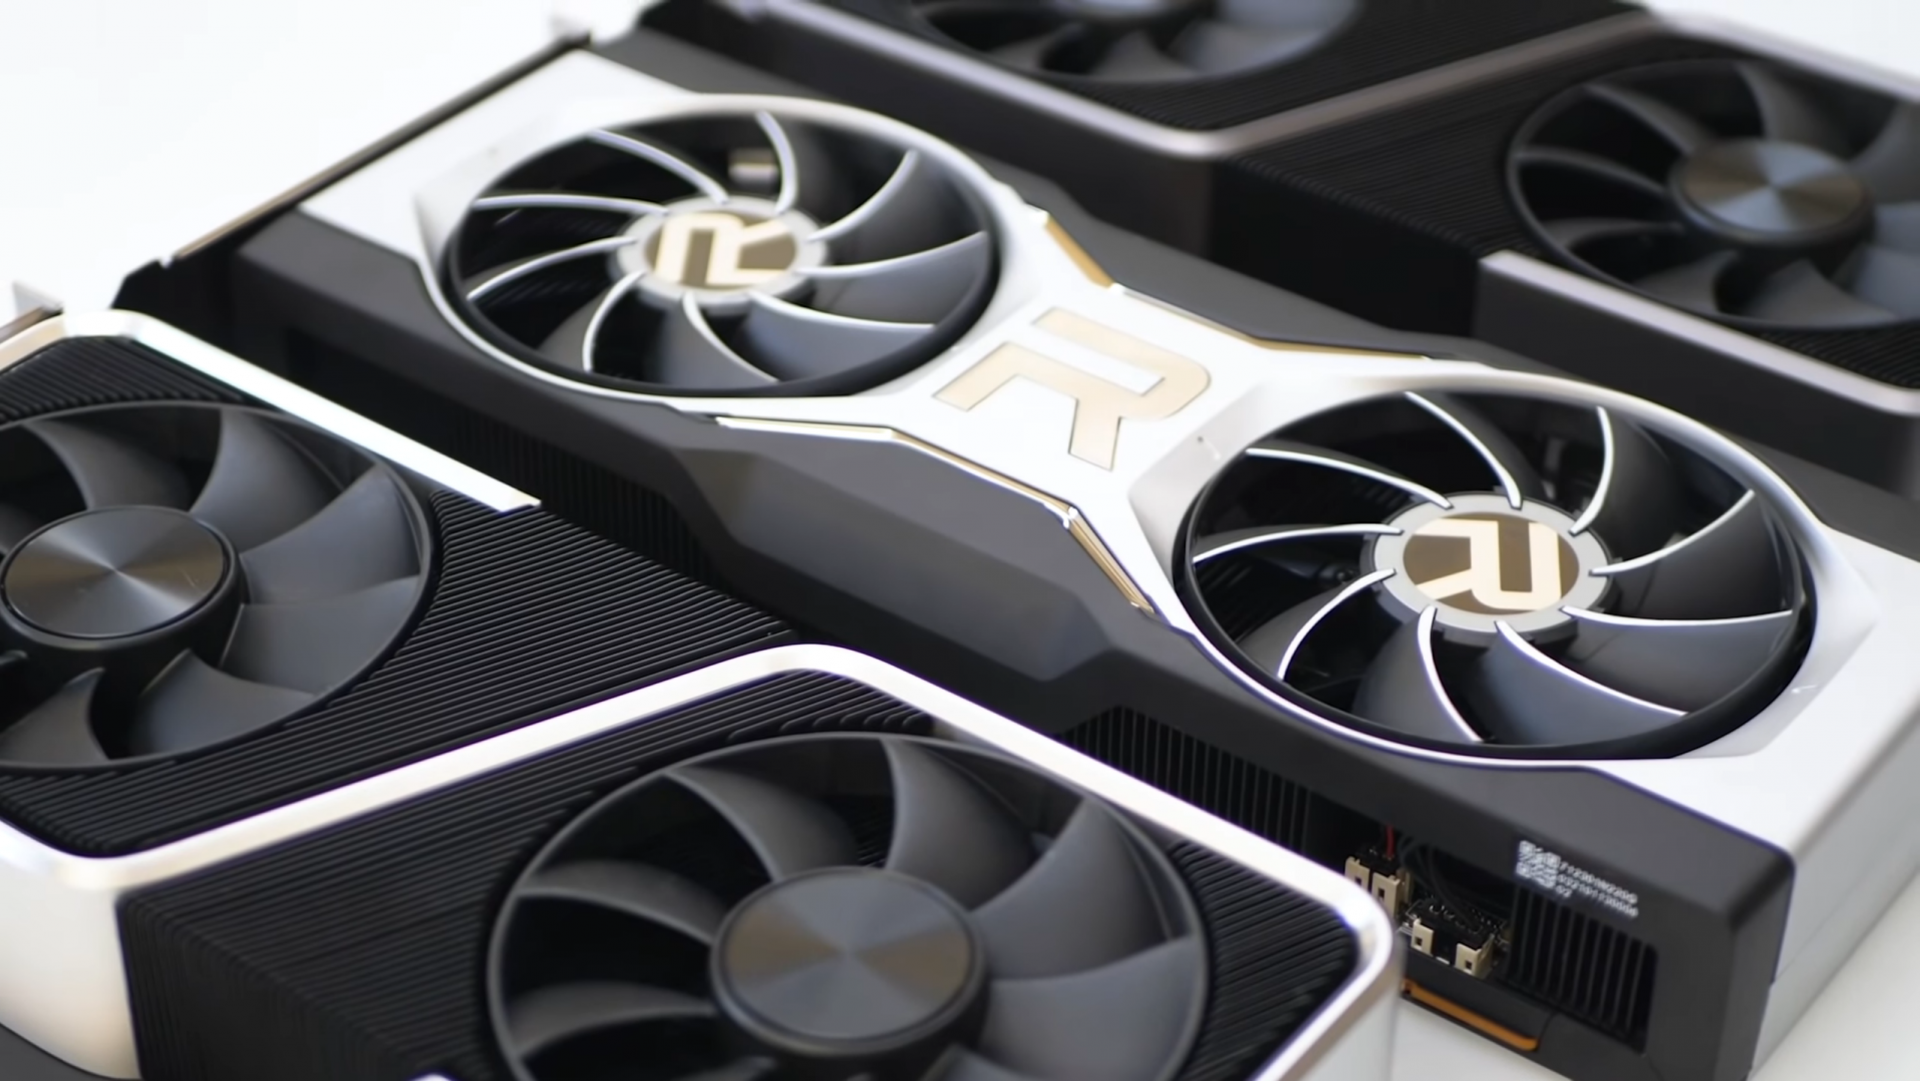 AMD Radeon RX 6000 and NVIDIA GeForce RTX 30 graphics card costs are on the upward push again in September